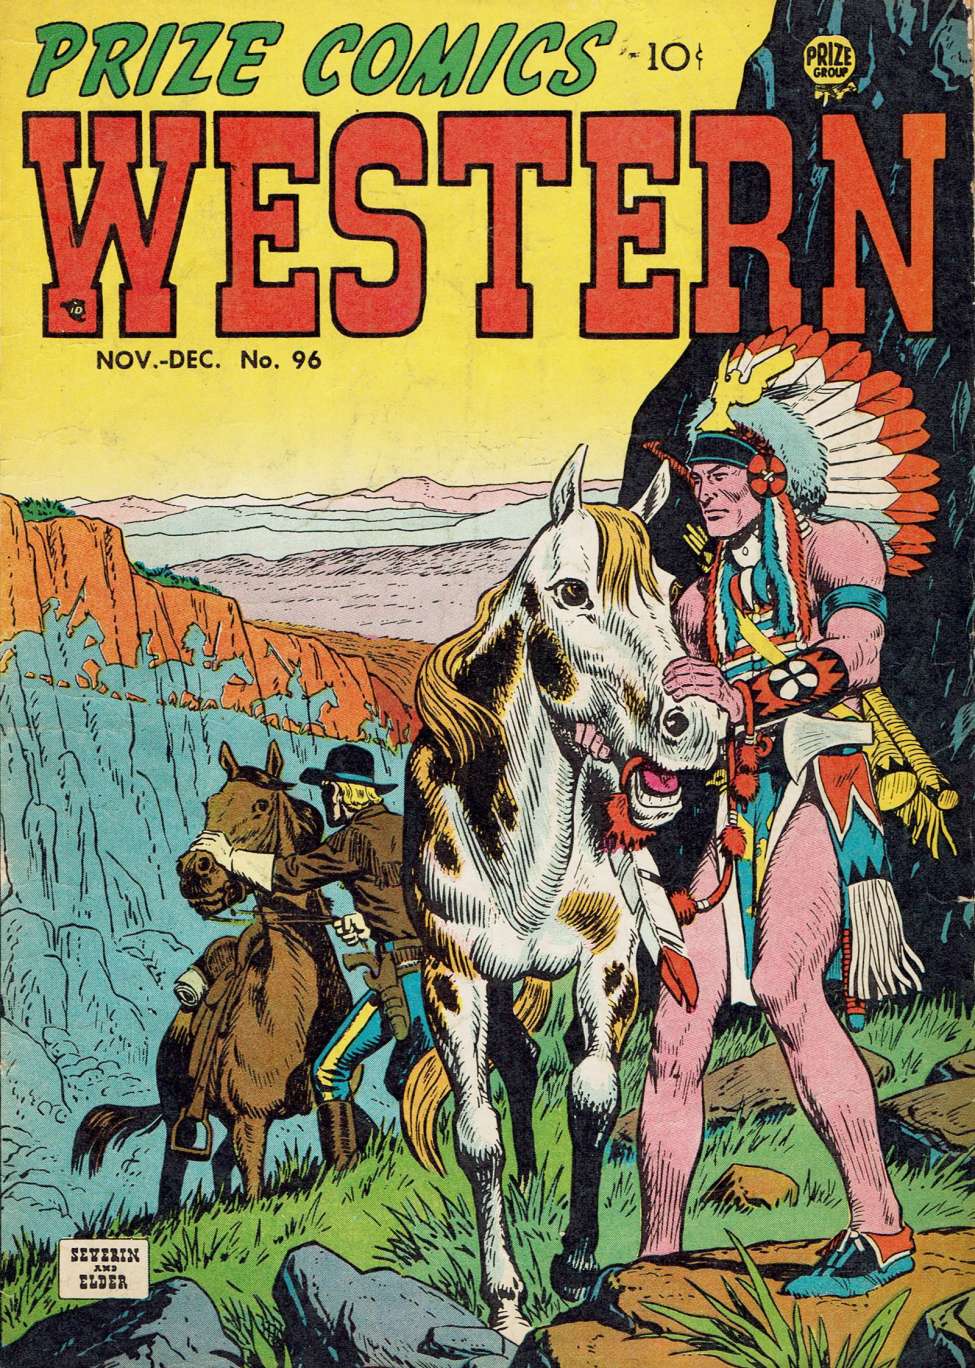 Book Cover For Prize Comics Western 96 (alt) - Version 2